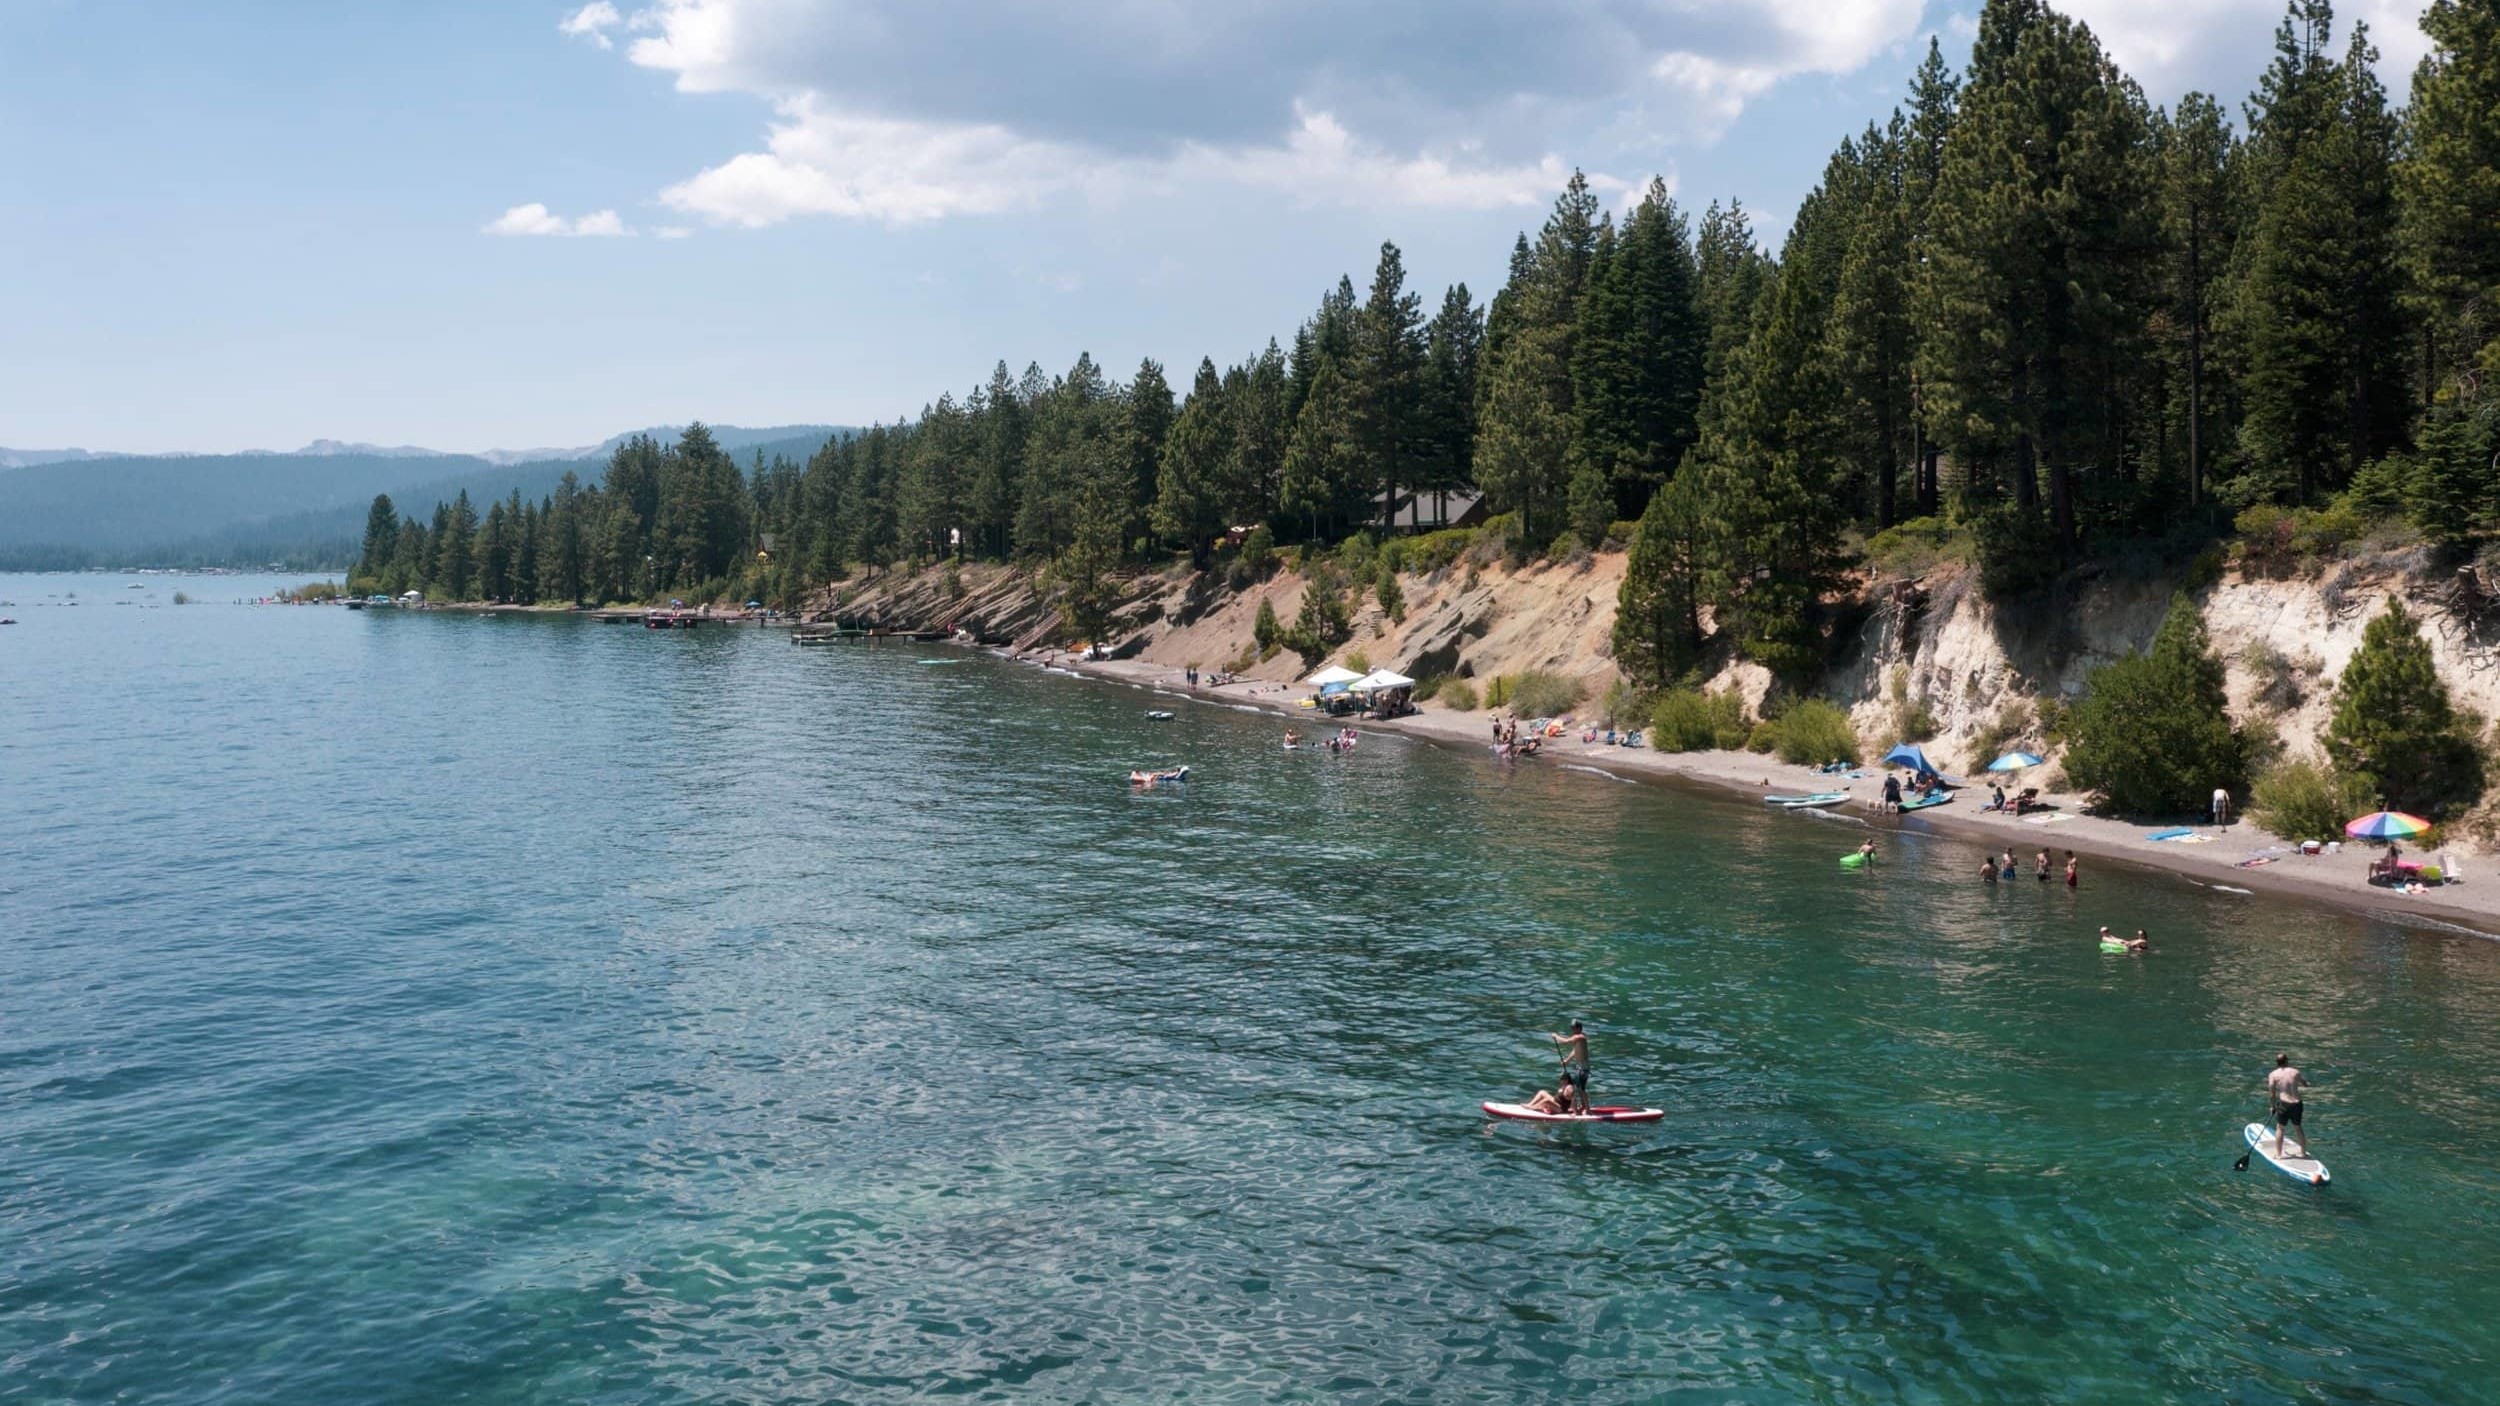 View of Lake Tahoe with paddle boarders.